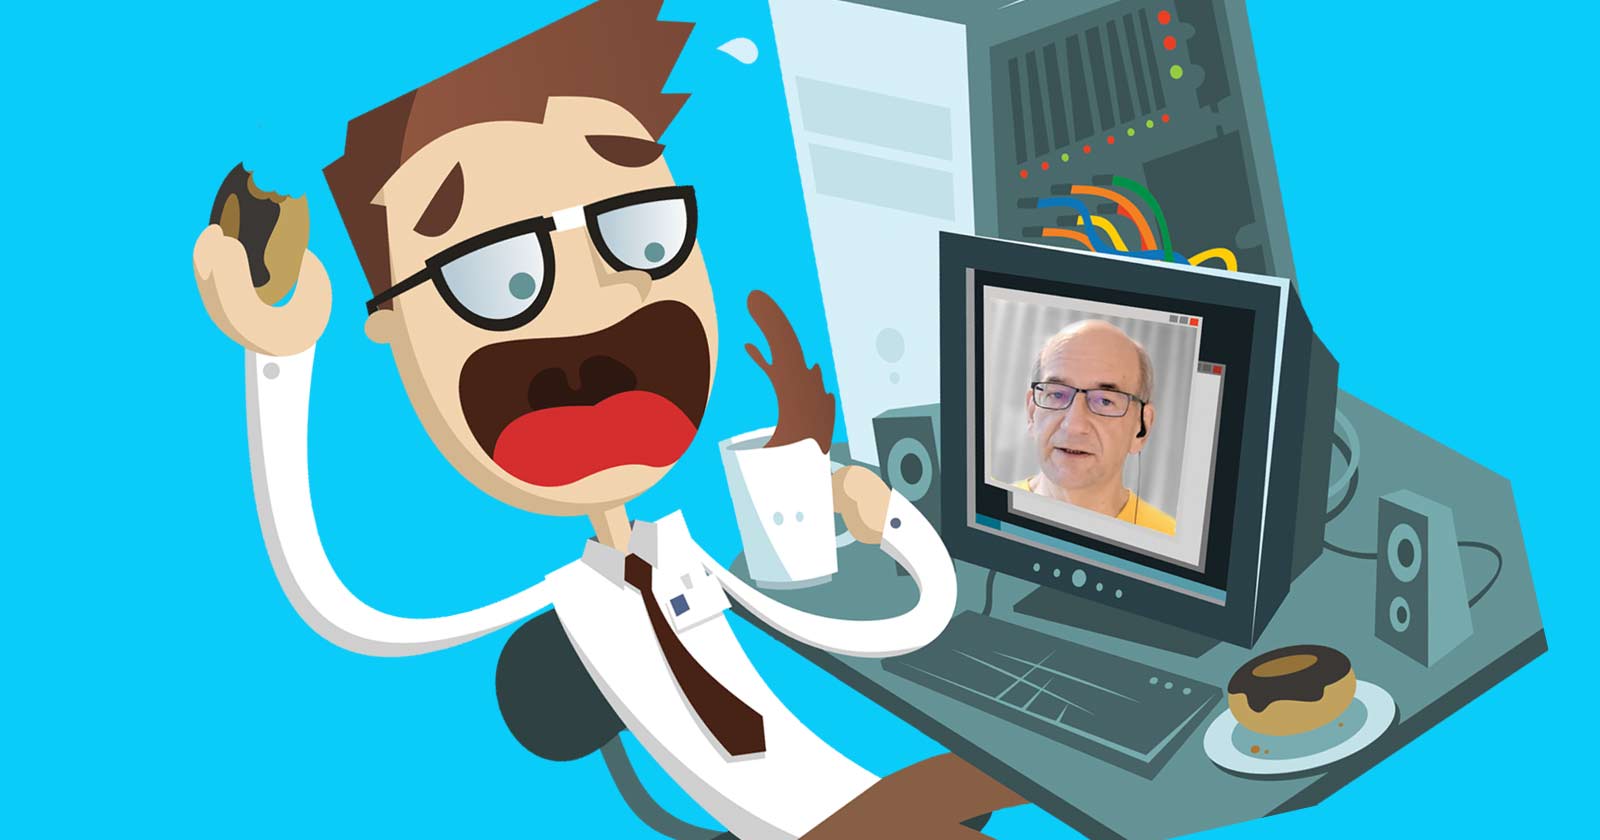 Image of a startled male office worker as Google's John Mueller appears on his computer monitor